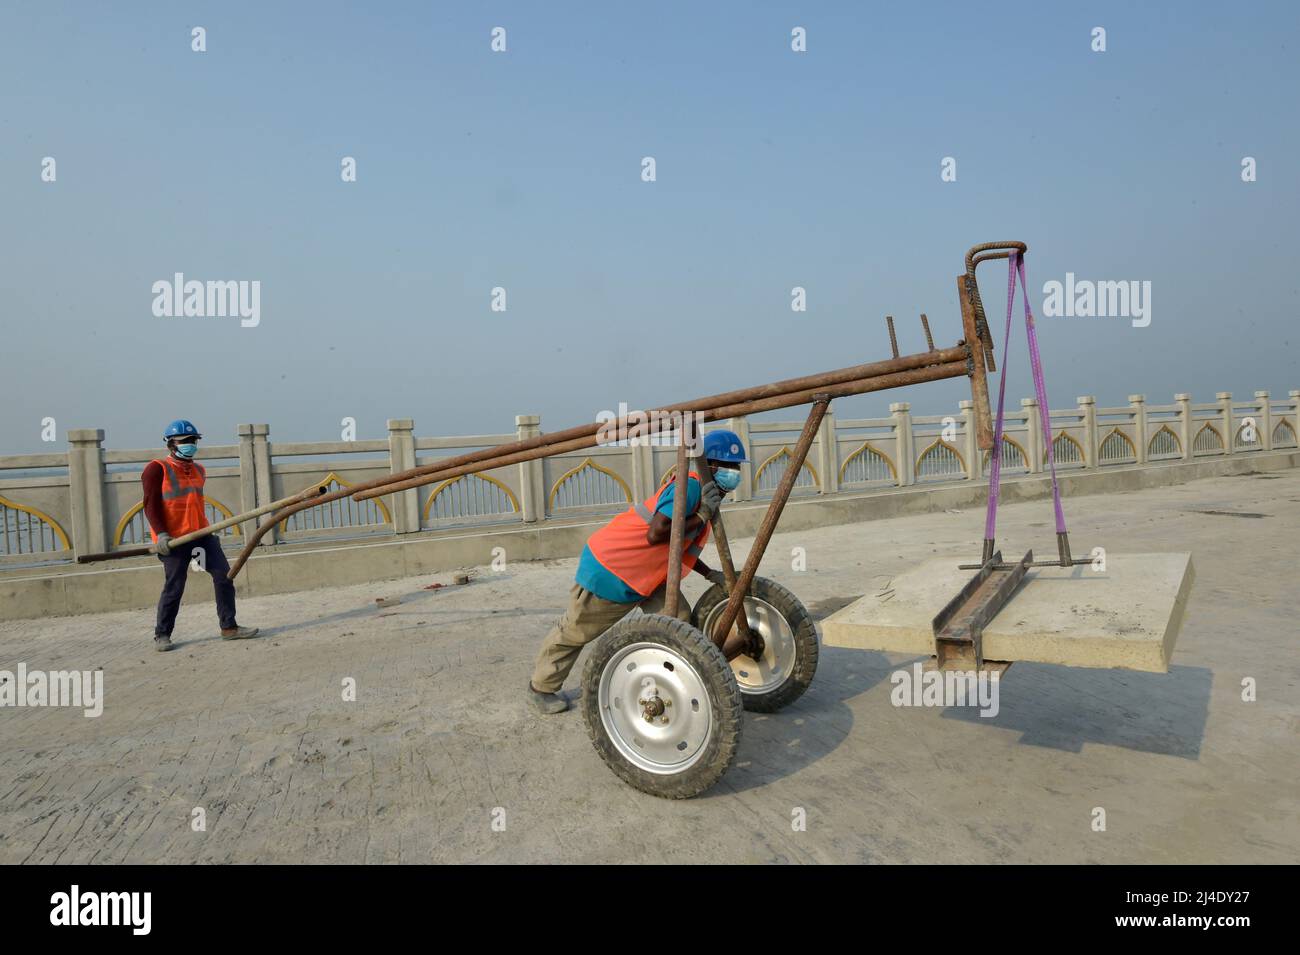 Pirojpur. 14th Apr, 2022. Workers are busy working at the construction site of the eighth Bangladesh-China Friendship Bridge in Pirojpur, Bangladesh on March 23, 2022. China Railway 17th Bureau Group Co. Ltd. is constructing the bridge over Kocha River in Pirojpur district, 185 km southwest of Dhaka, under the management of China Railway Major Bridge Reconnaissance & Design Institute Co. Ltd. Credit: Xinhua/Alamy Live News Stock Photo